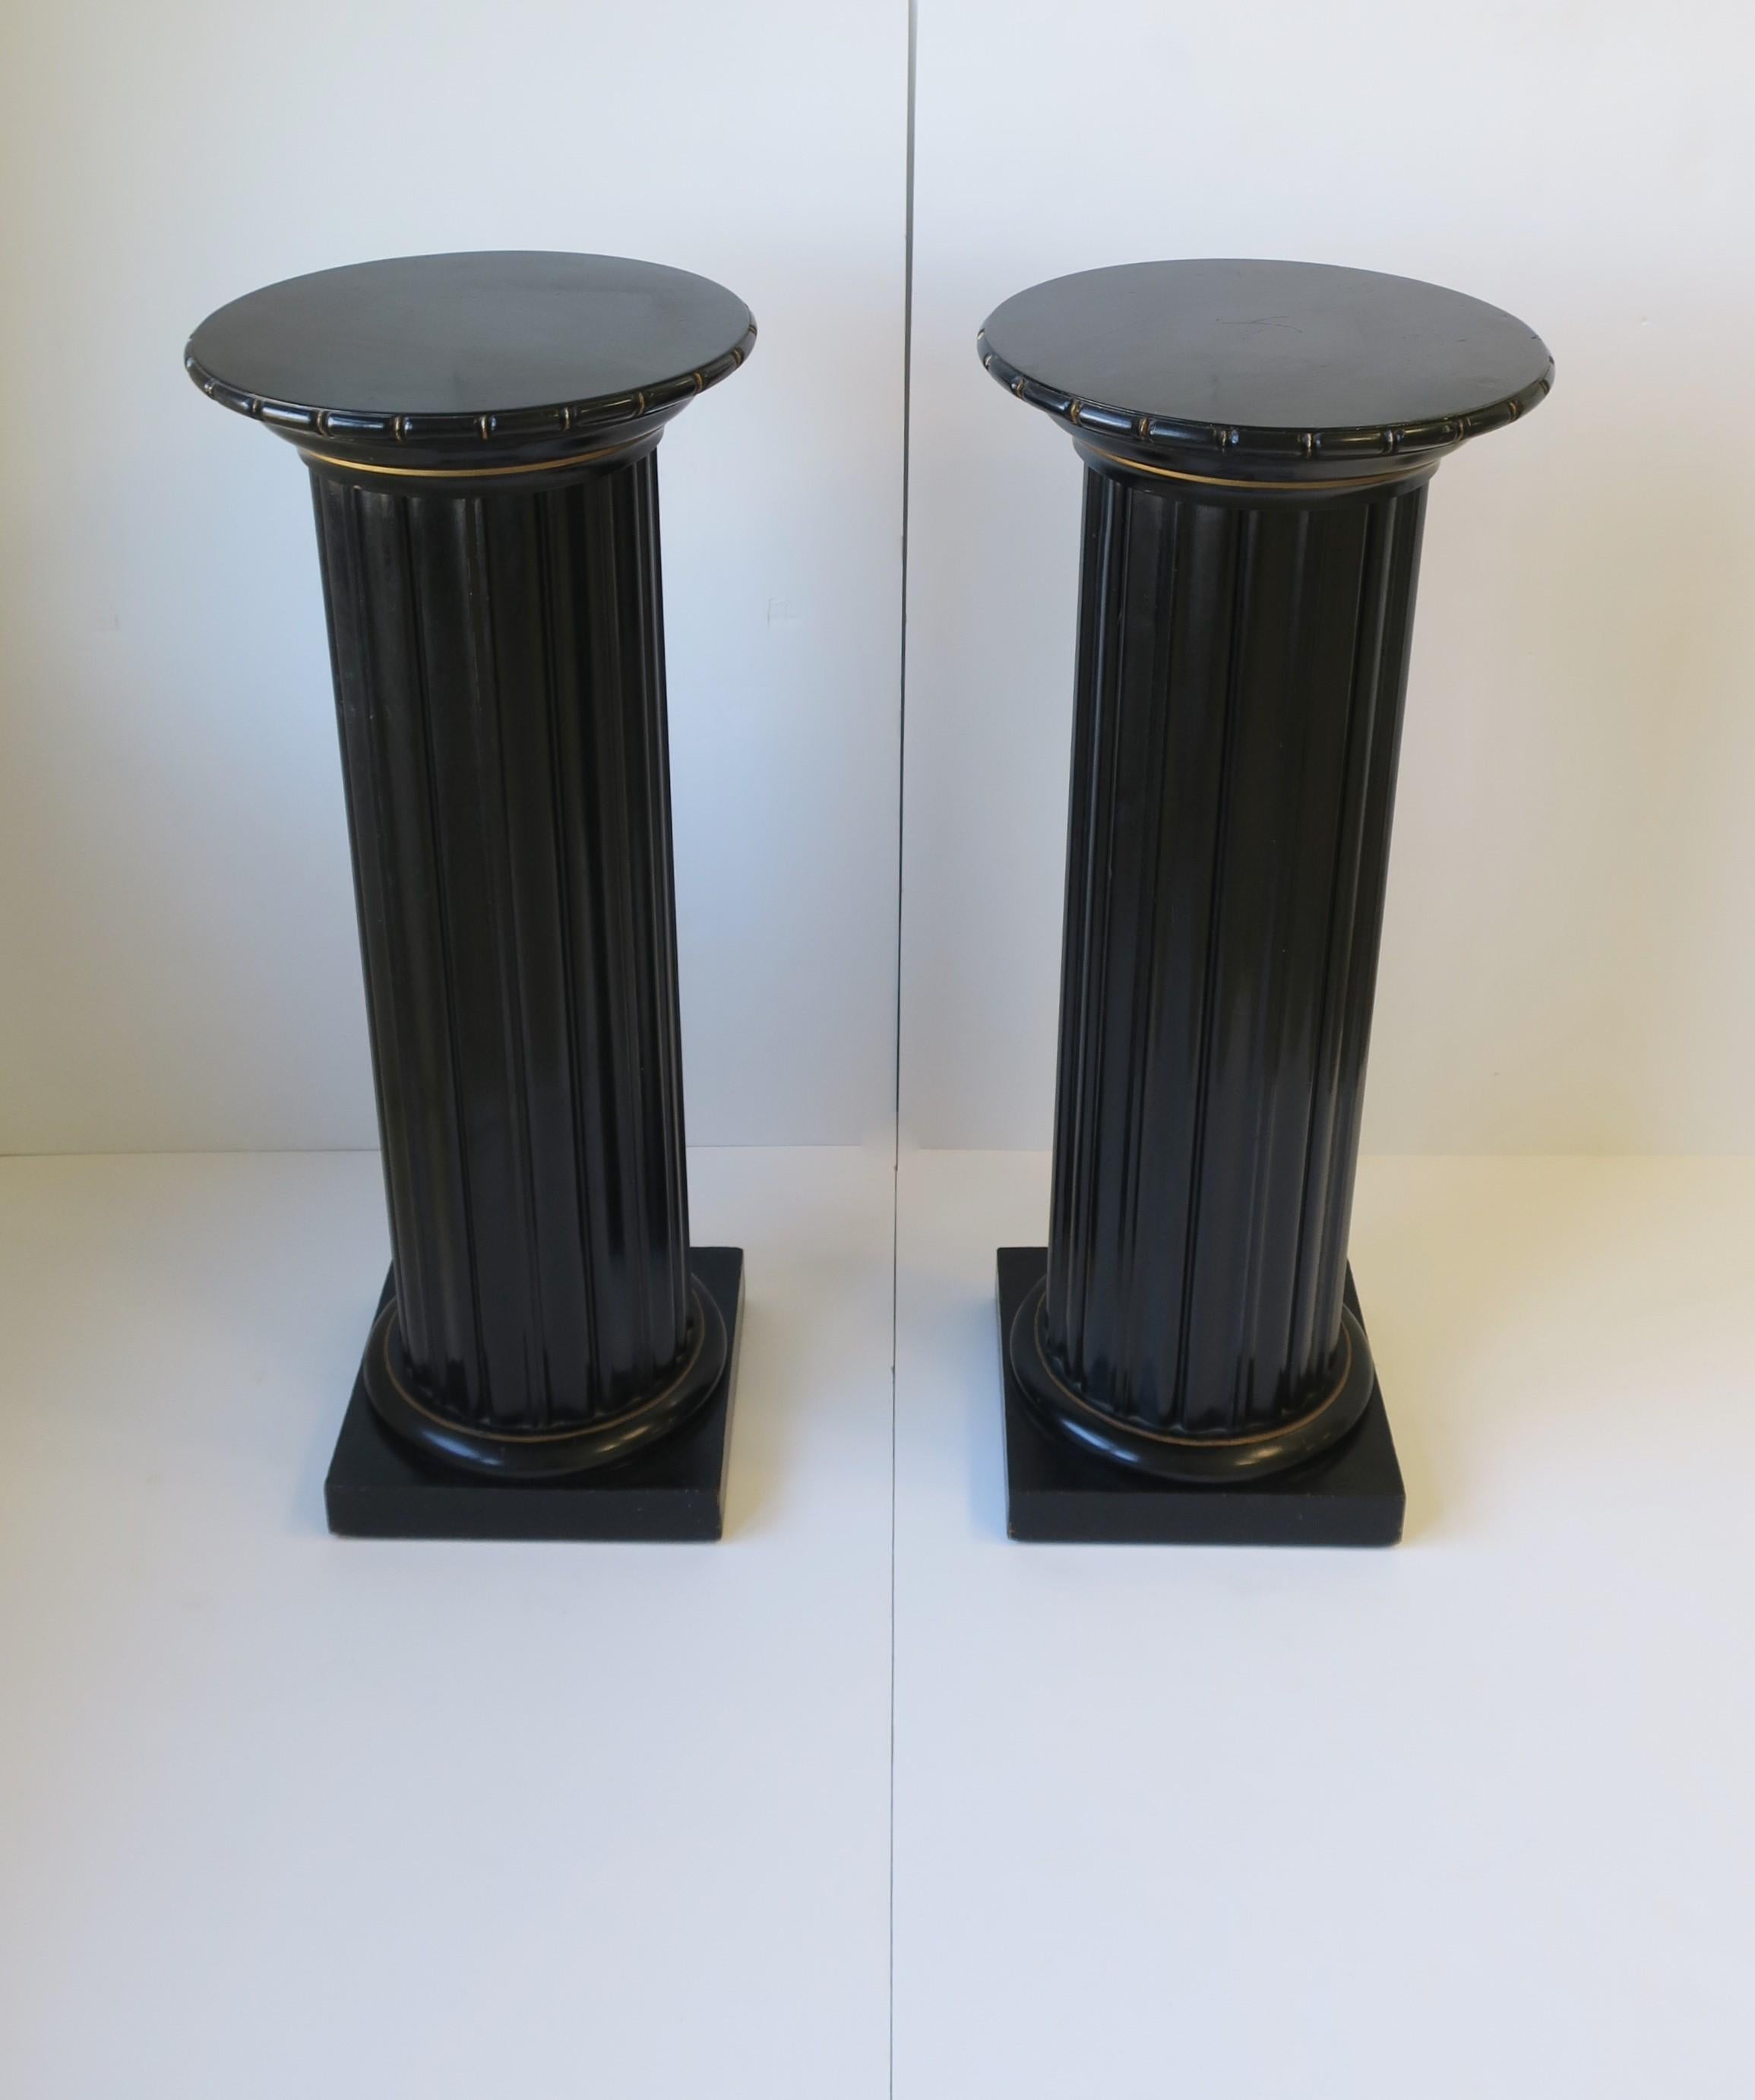 Black Lacquer Wood Pillar Column Pedestal Stand in the Neoclassical Design 1